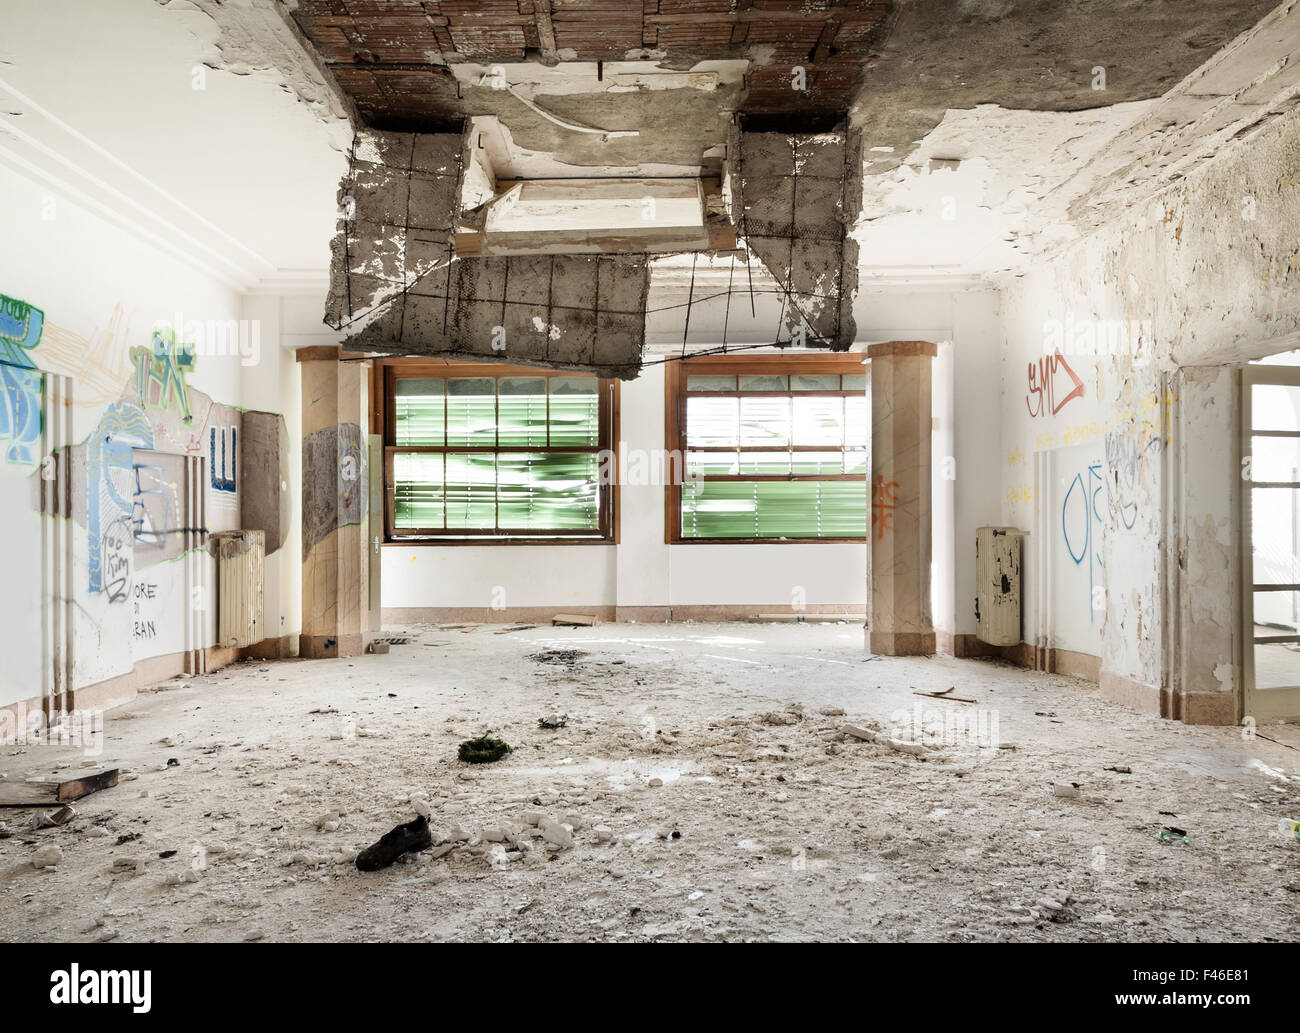 old destroyed building, large room with two windows Stock Photo